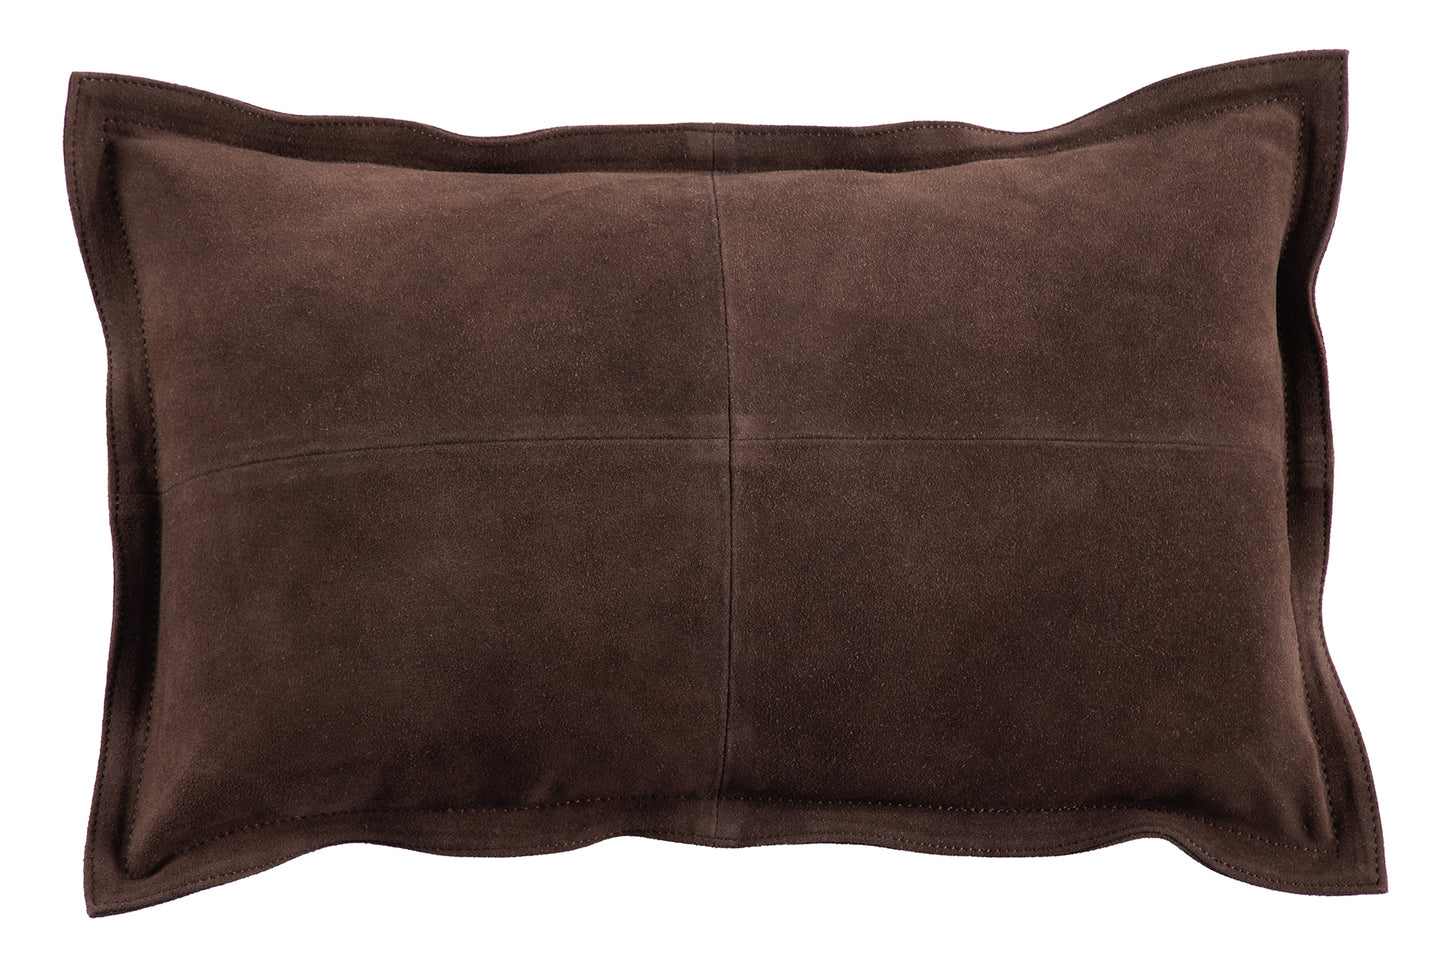 Suede Leather Cushion